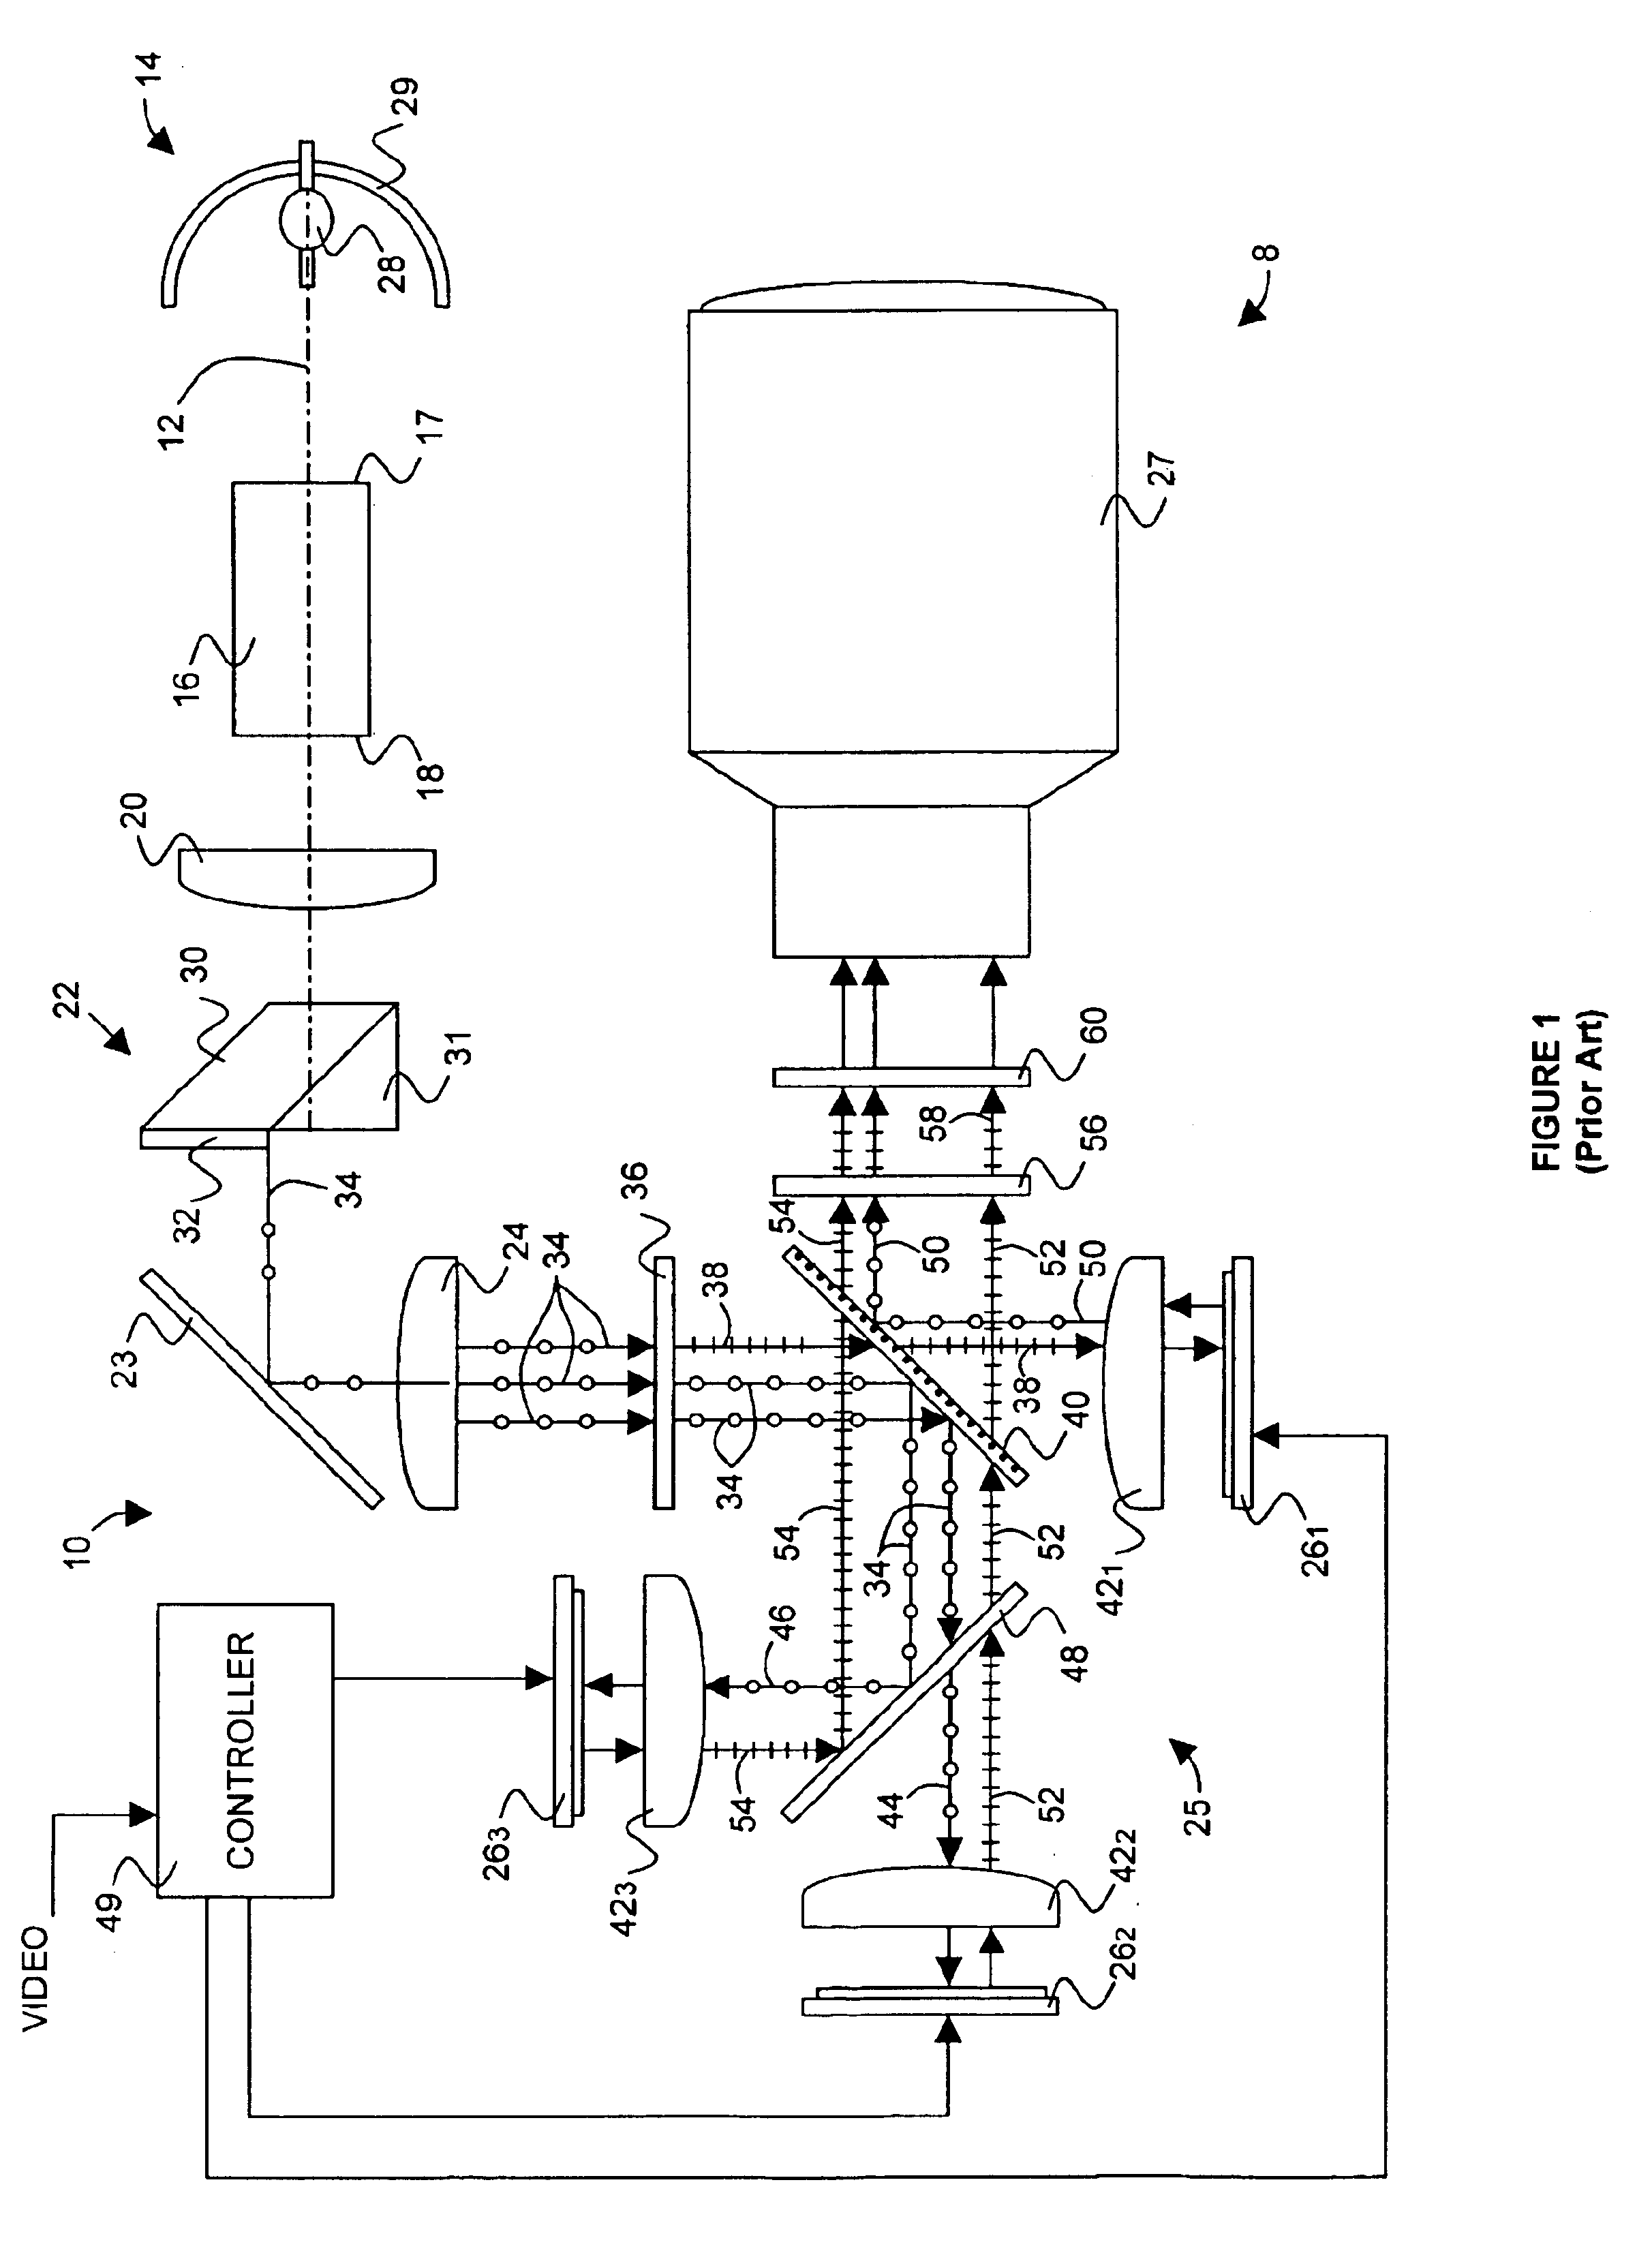 Single-path color video projection systems employing reflective liquid crystal display devices